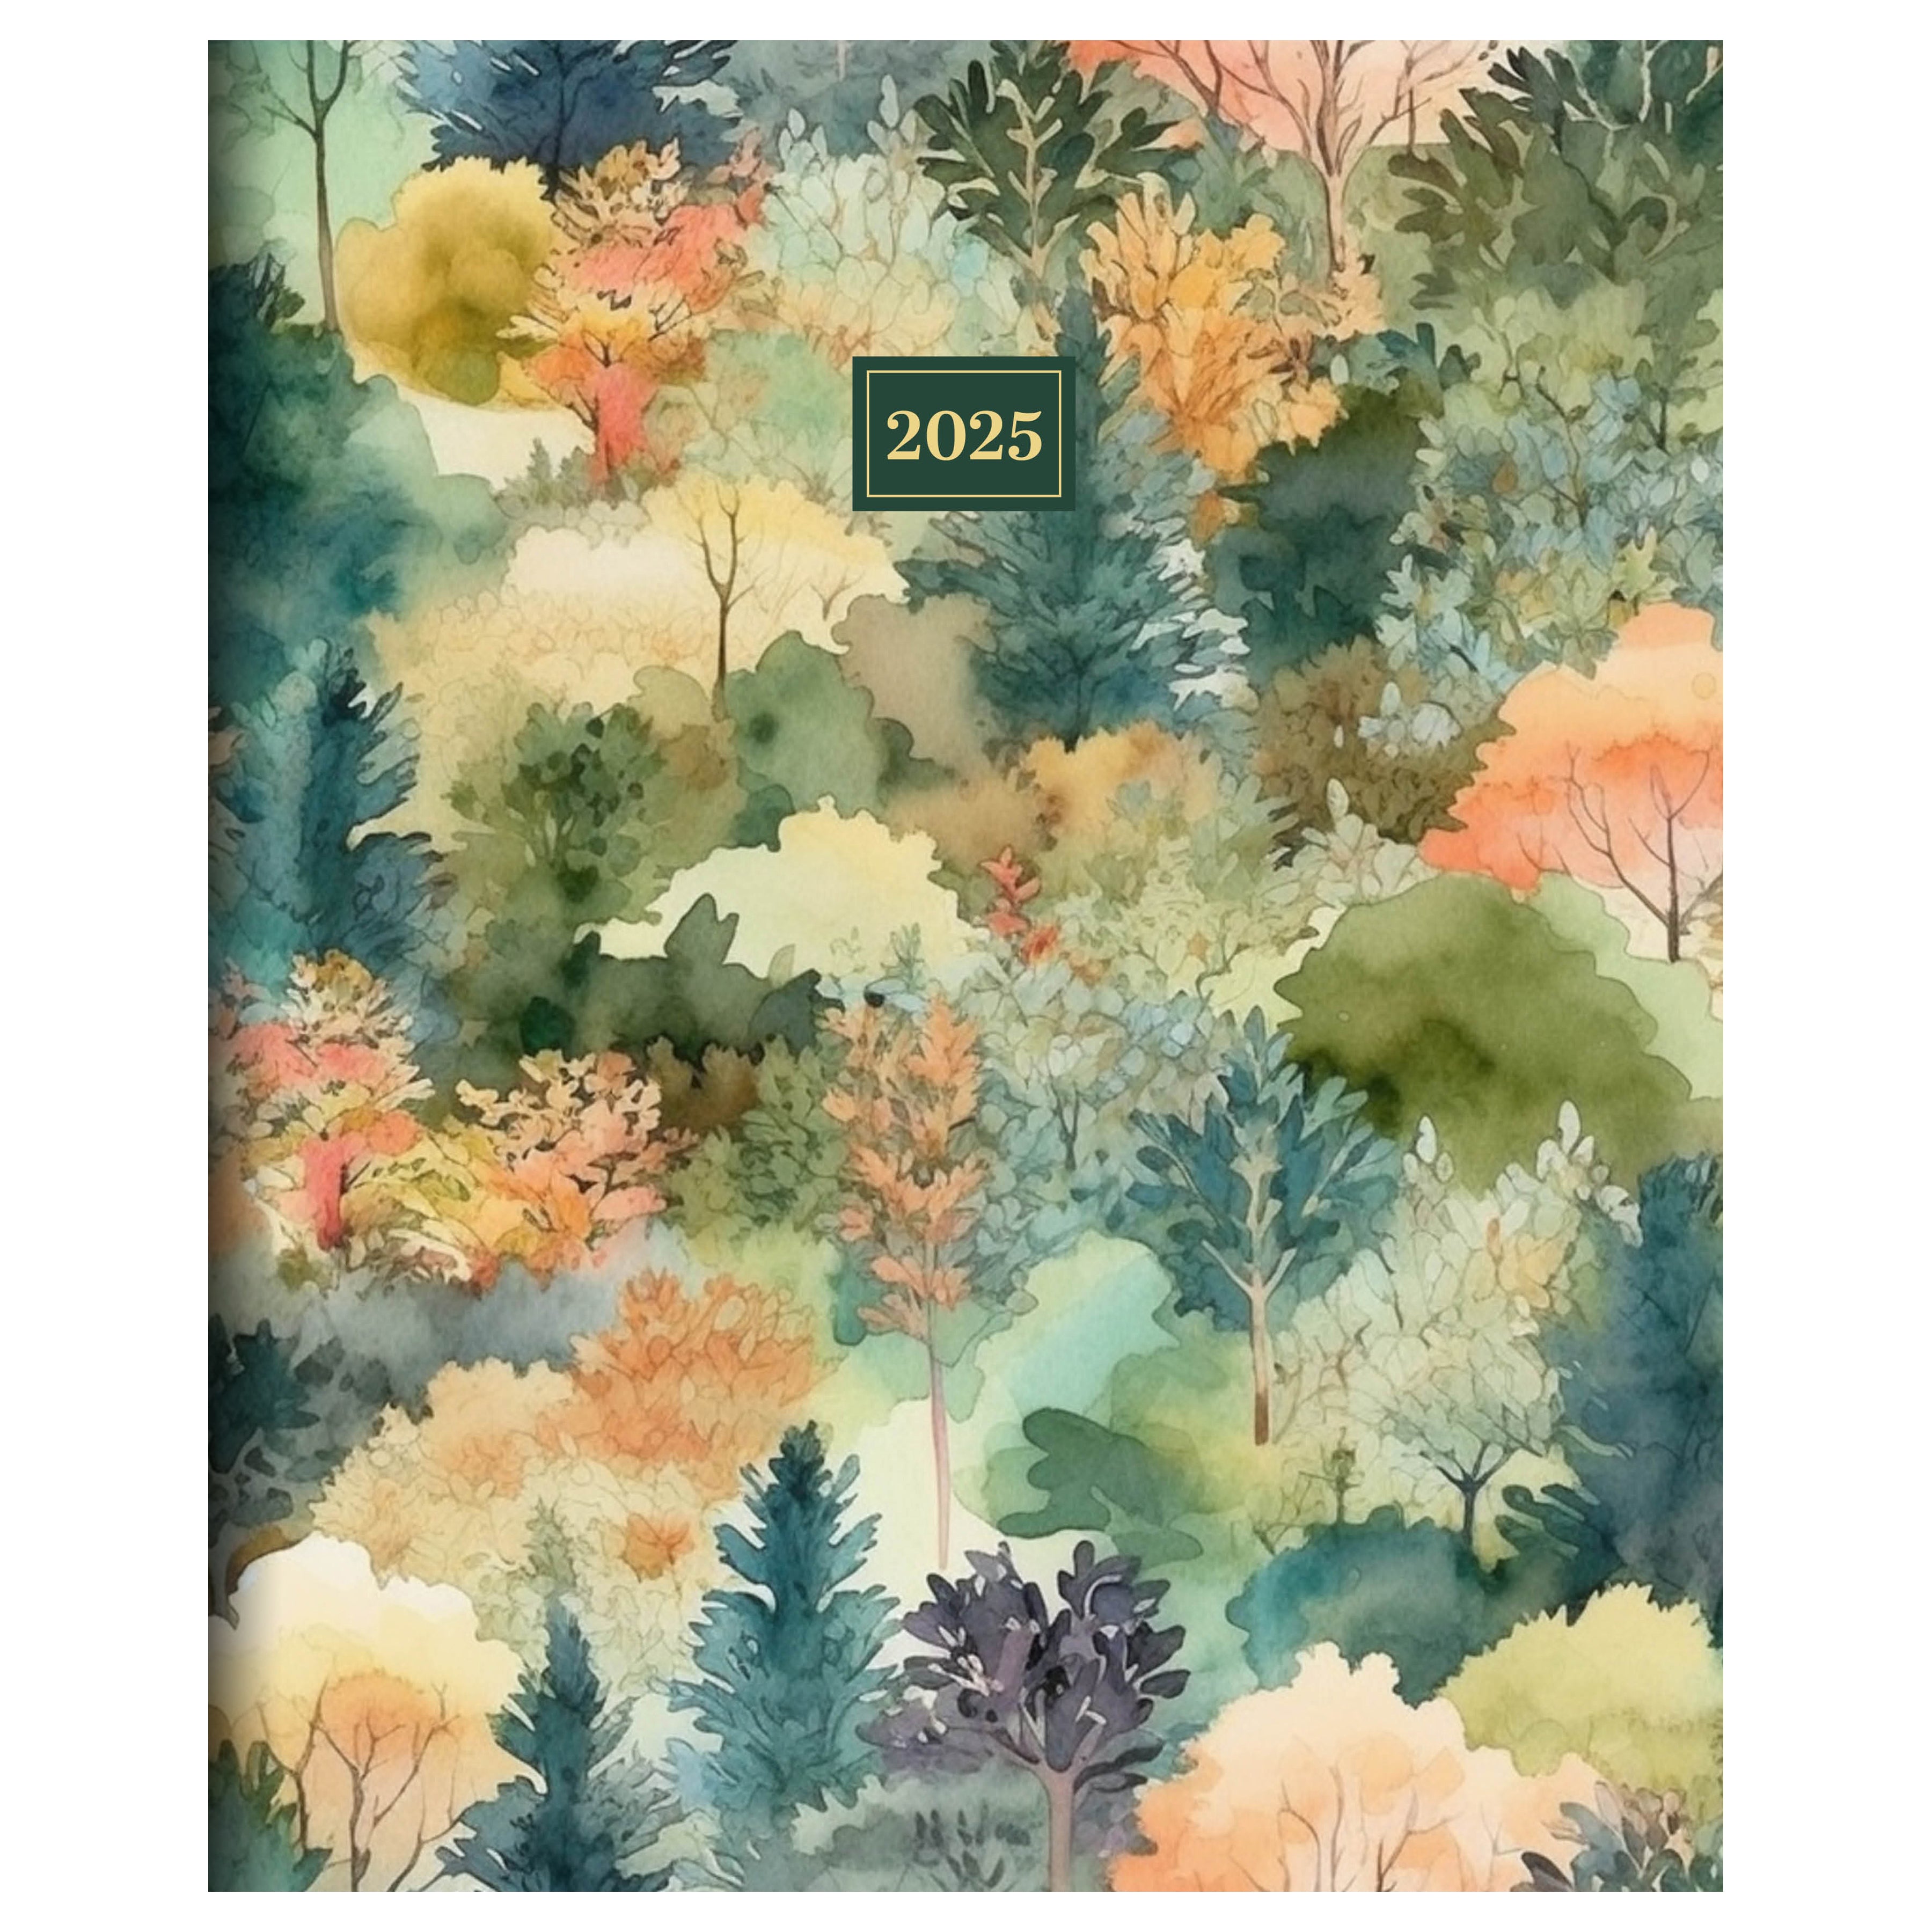 2025 Mural of Trees - Large Monthly Diary/Planner